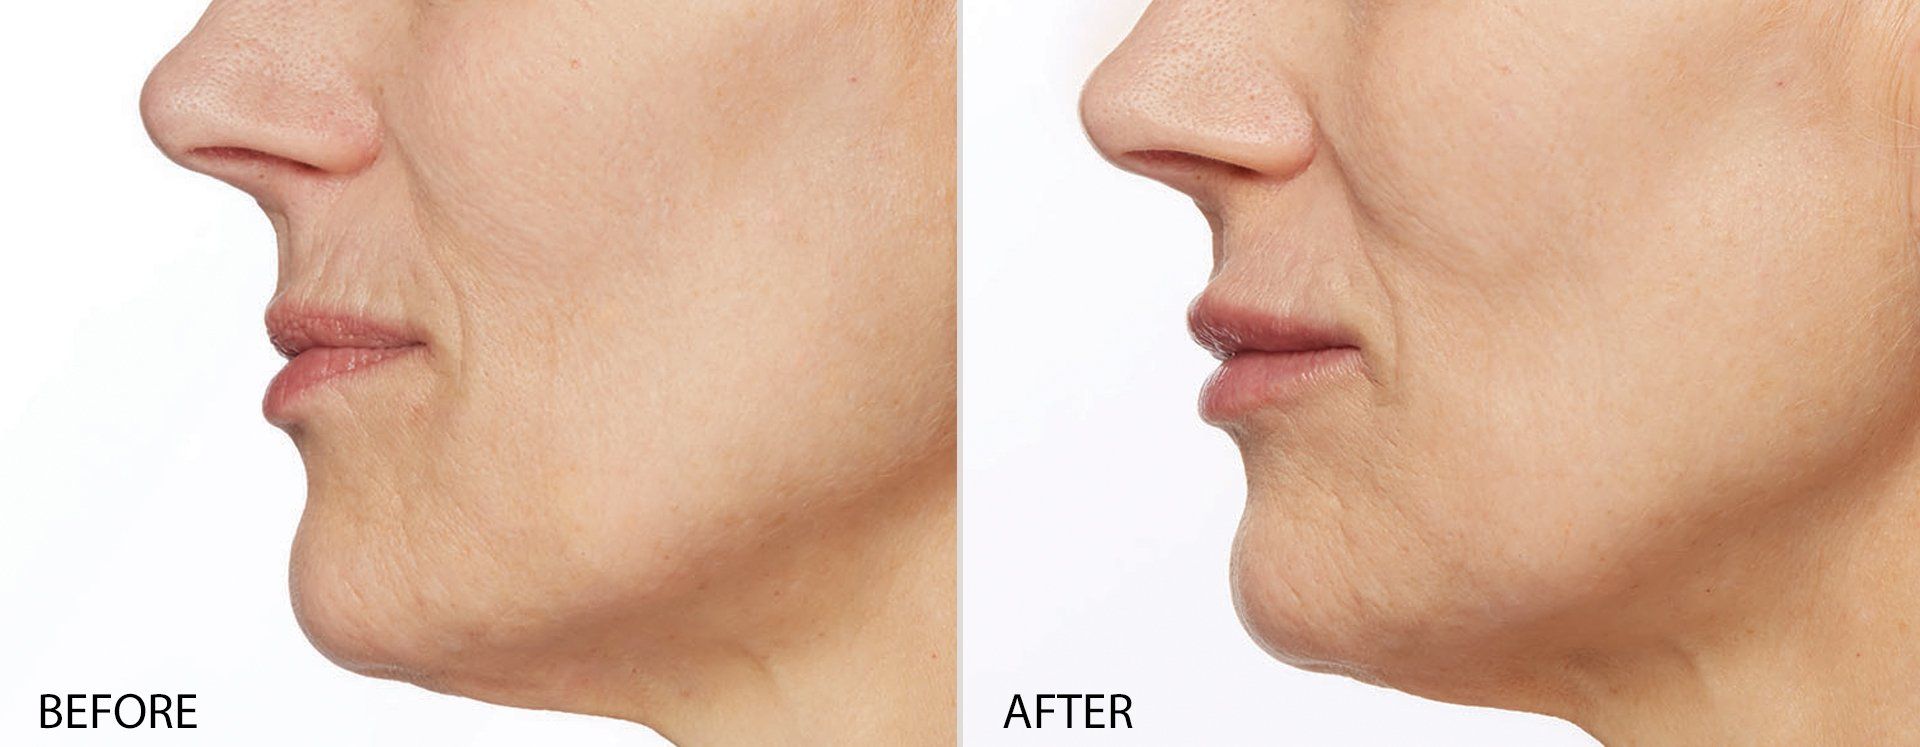 Before and after Dermal Fillers - Side View